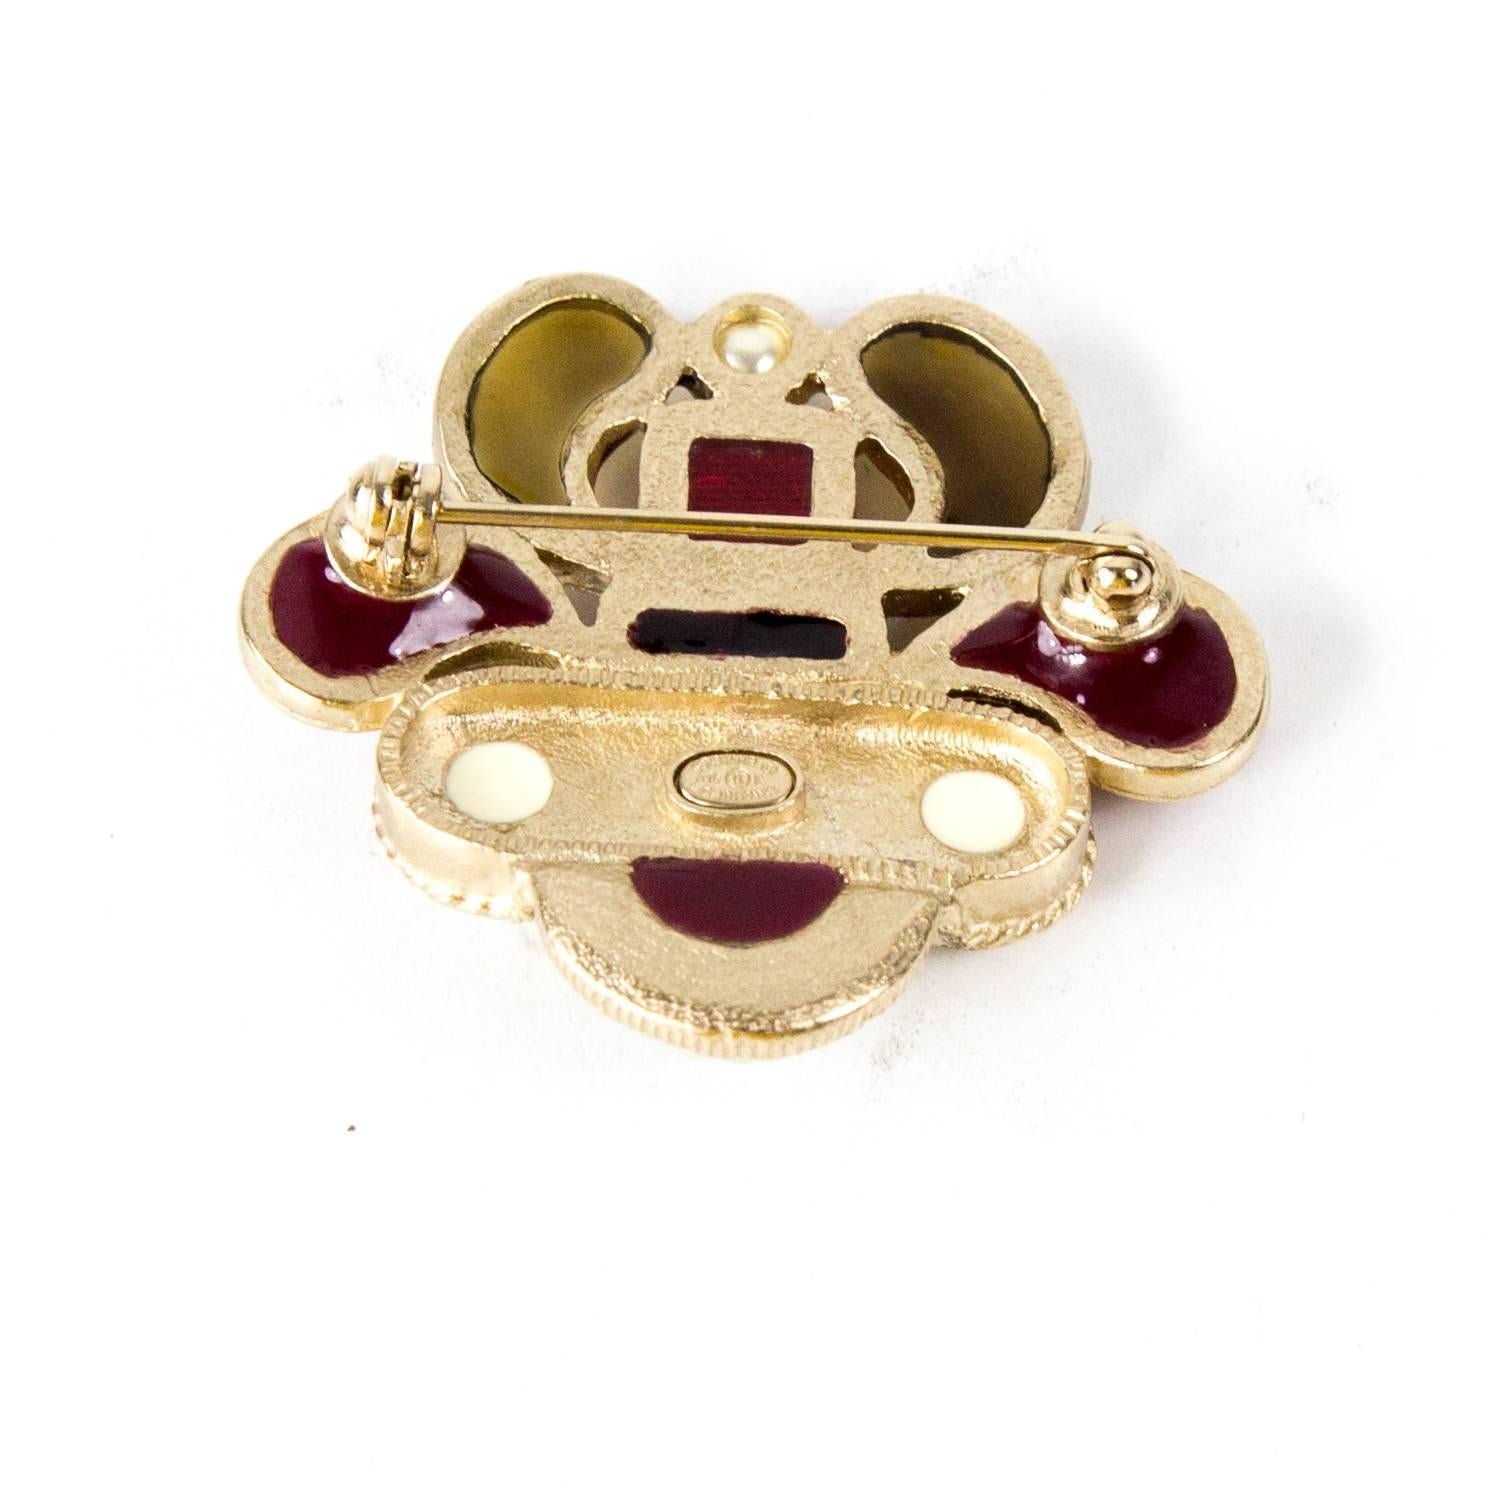 BRAND NEW:

Chanel - 2016 Puppy Dog Pearl Brooch Pin with Floppy Ears

Color: Gold / Red / Brown

Material: Metal / Pearl / Glass

------------------------------------------------------------

Details:

- gold tone hardware

- CC logo